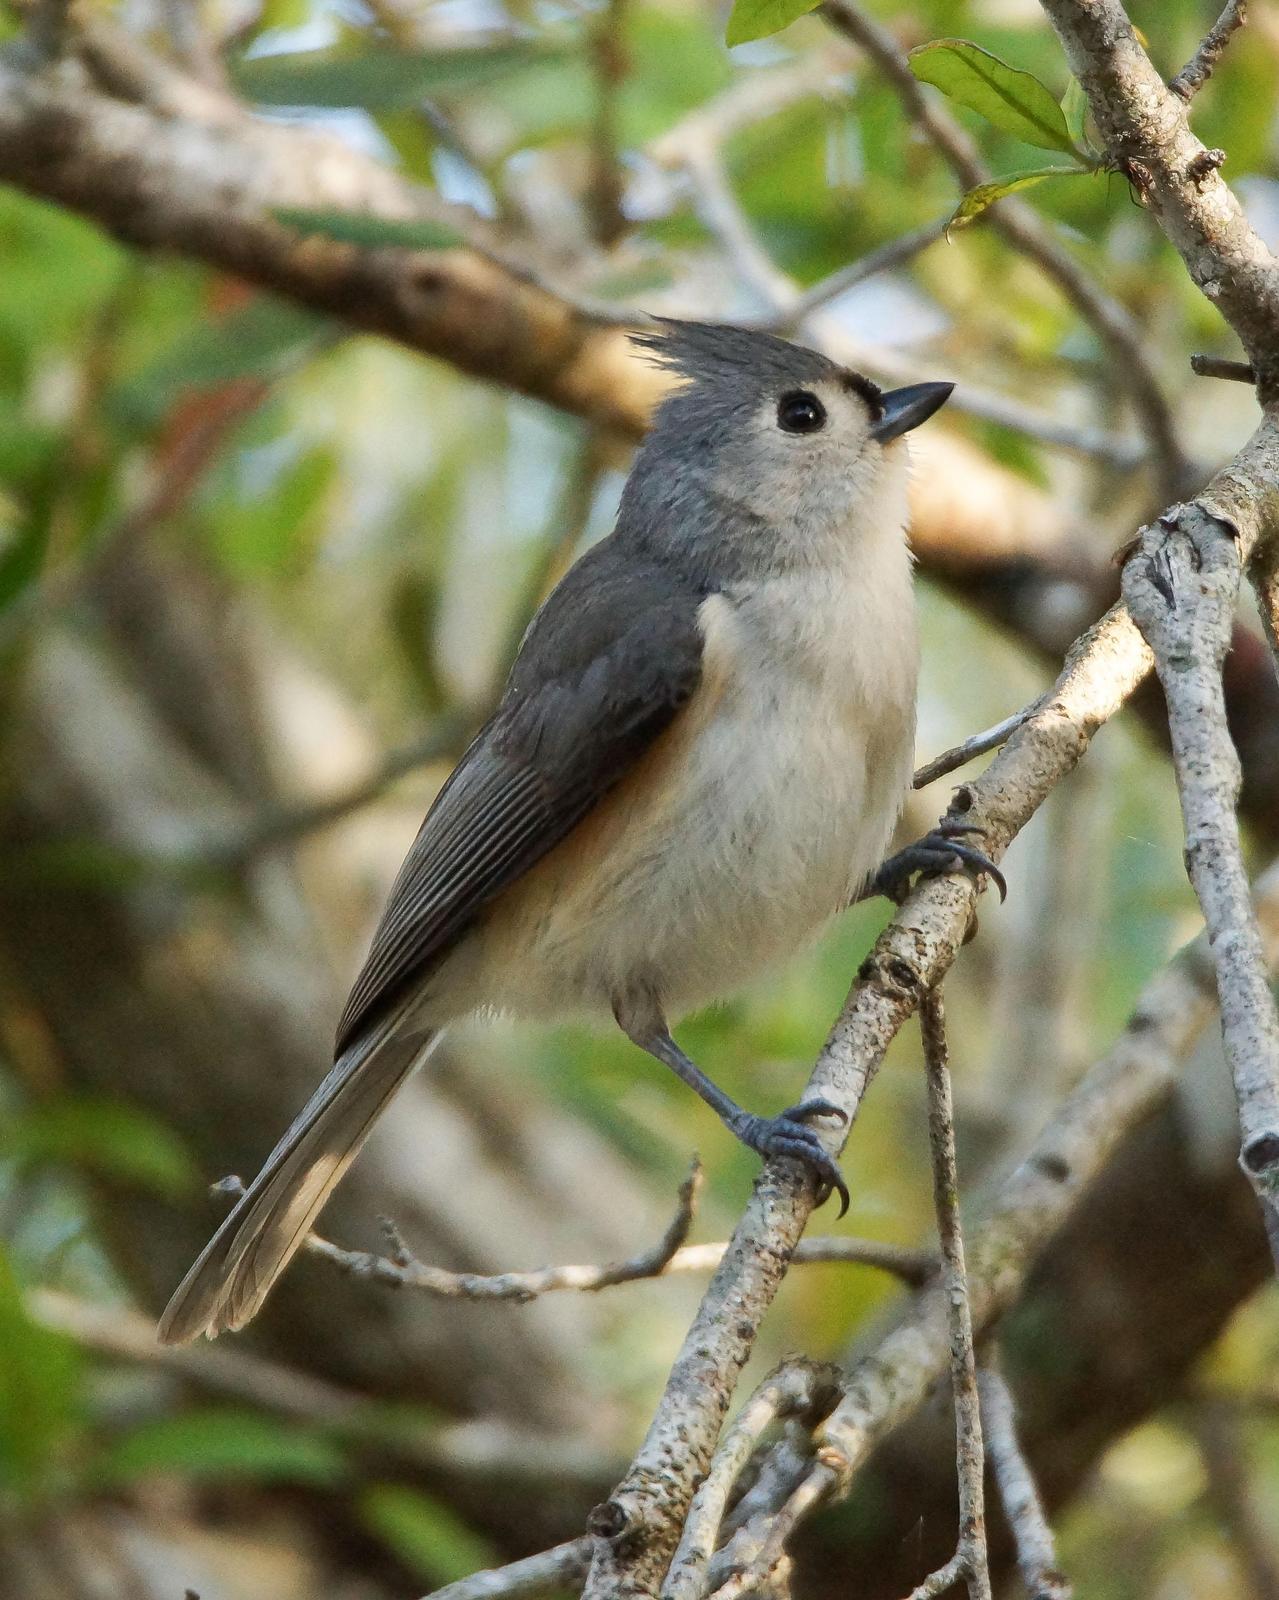 Tufted Titmouse Photo by Steve Percival